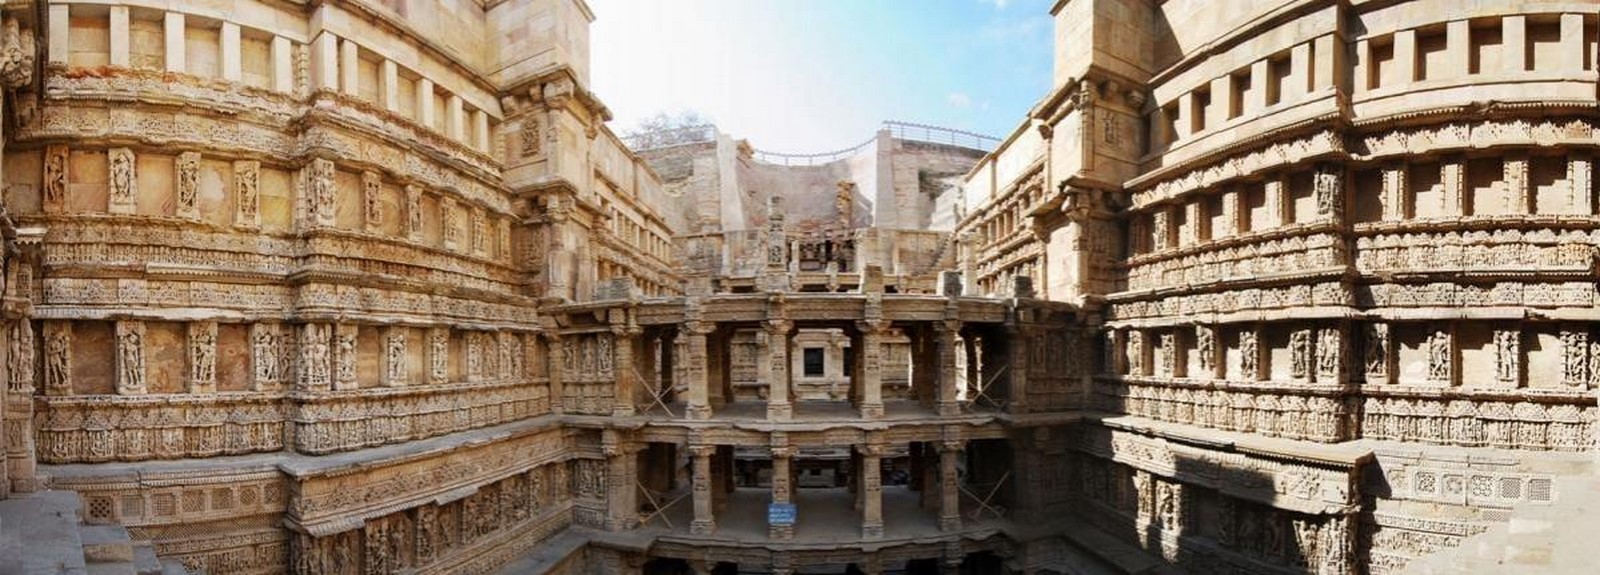 Buildings In India: 15 Architectural Marvels Every Architect Must See - Sheet24